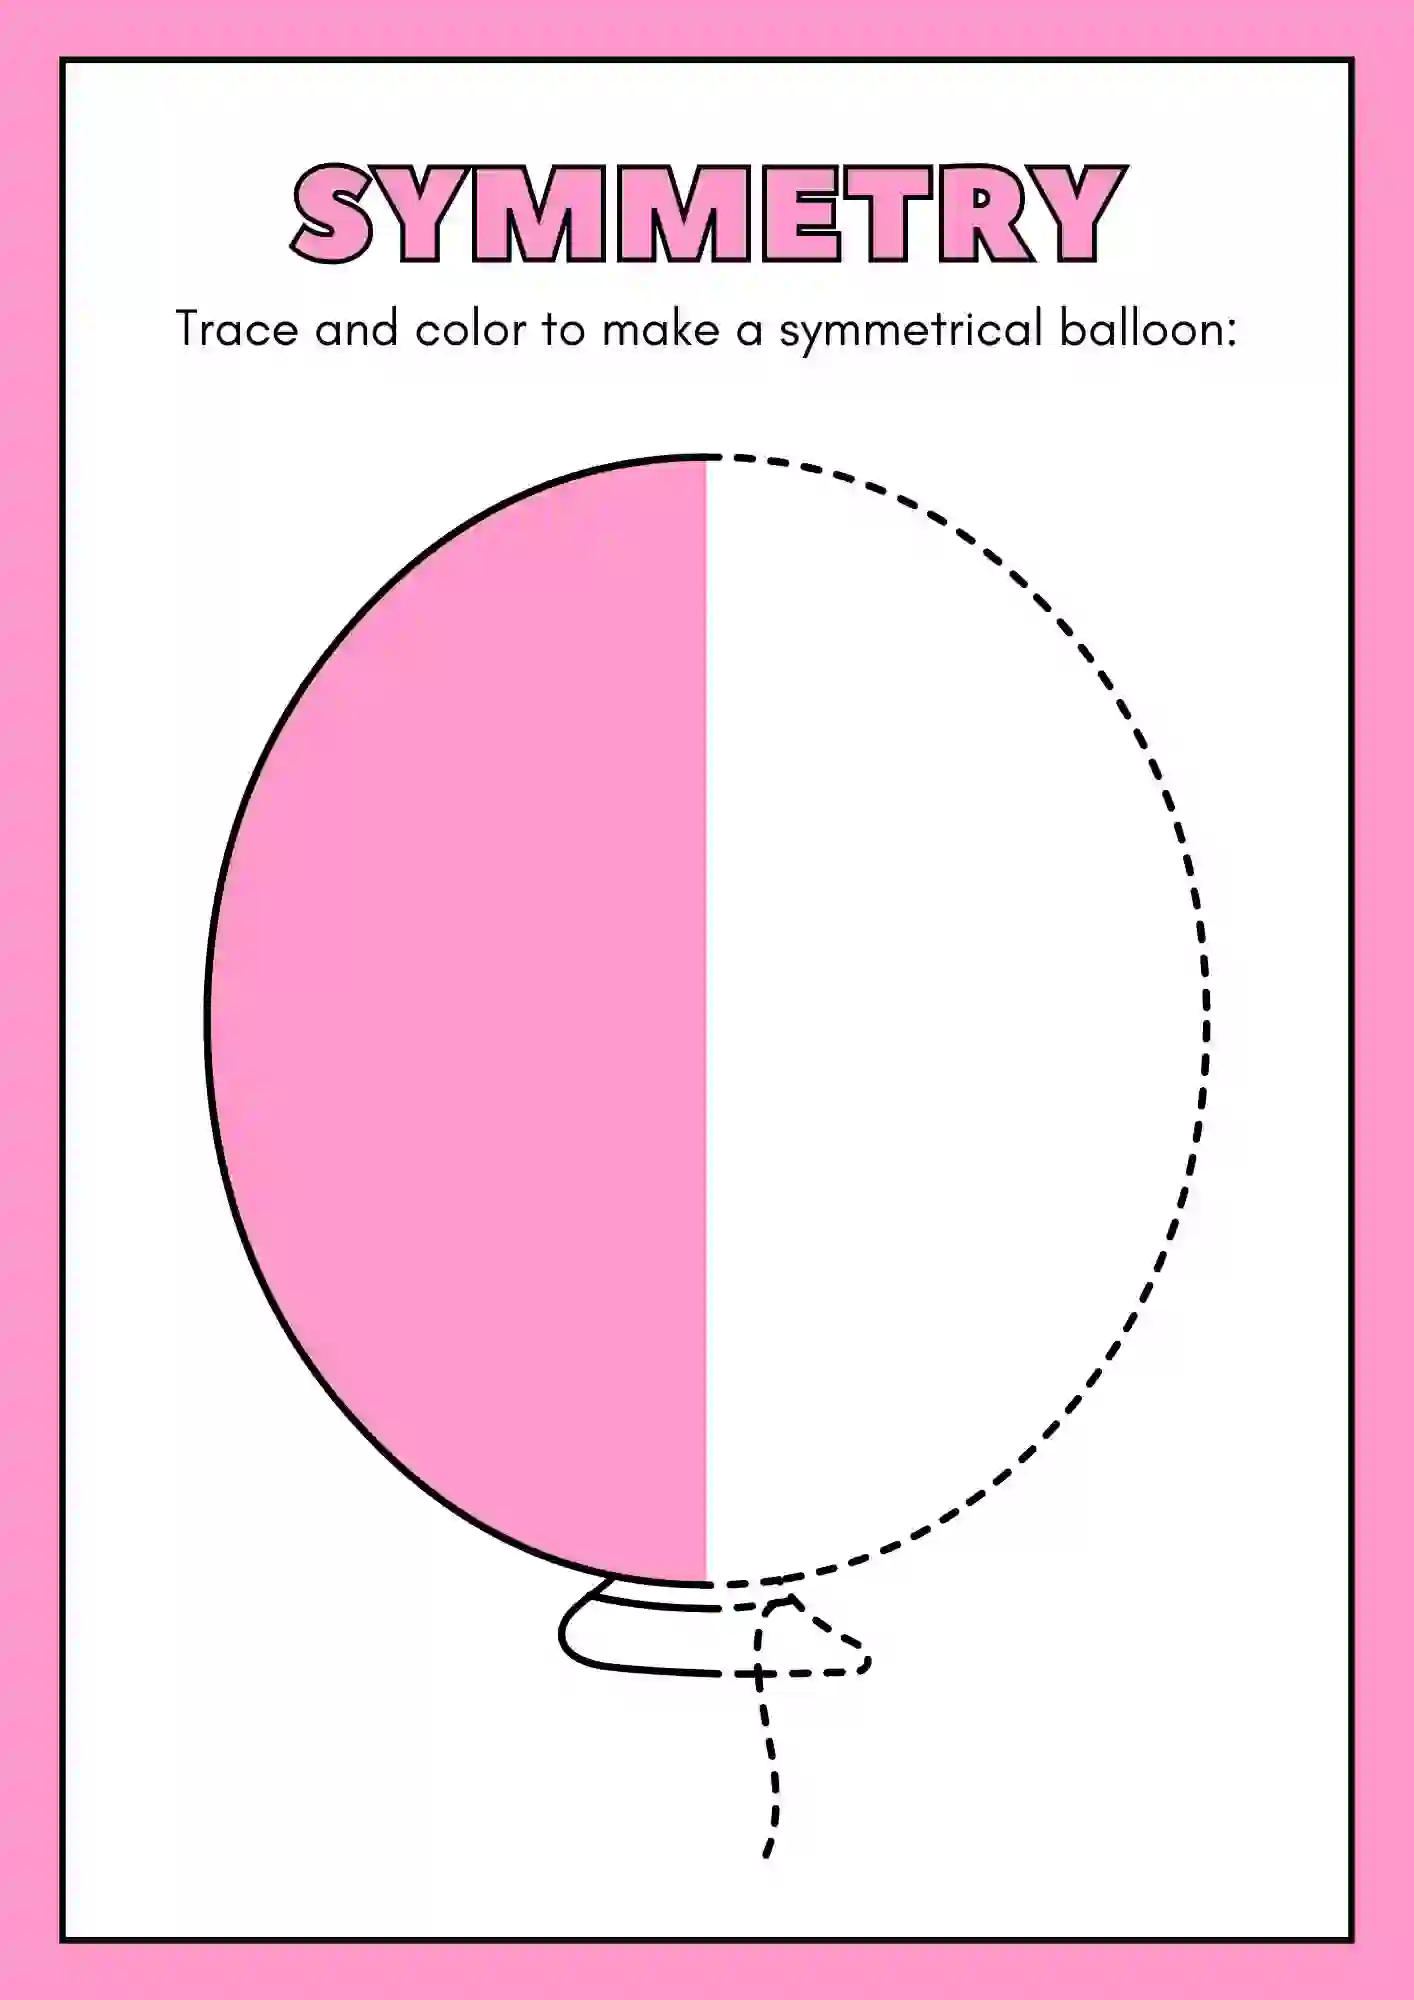 Symmetric Drawing and Coloring worksheets (ballon)